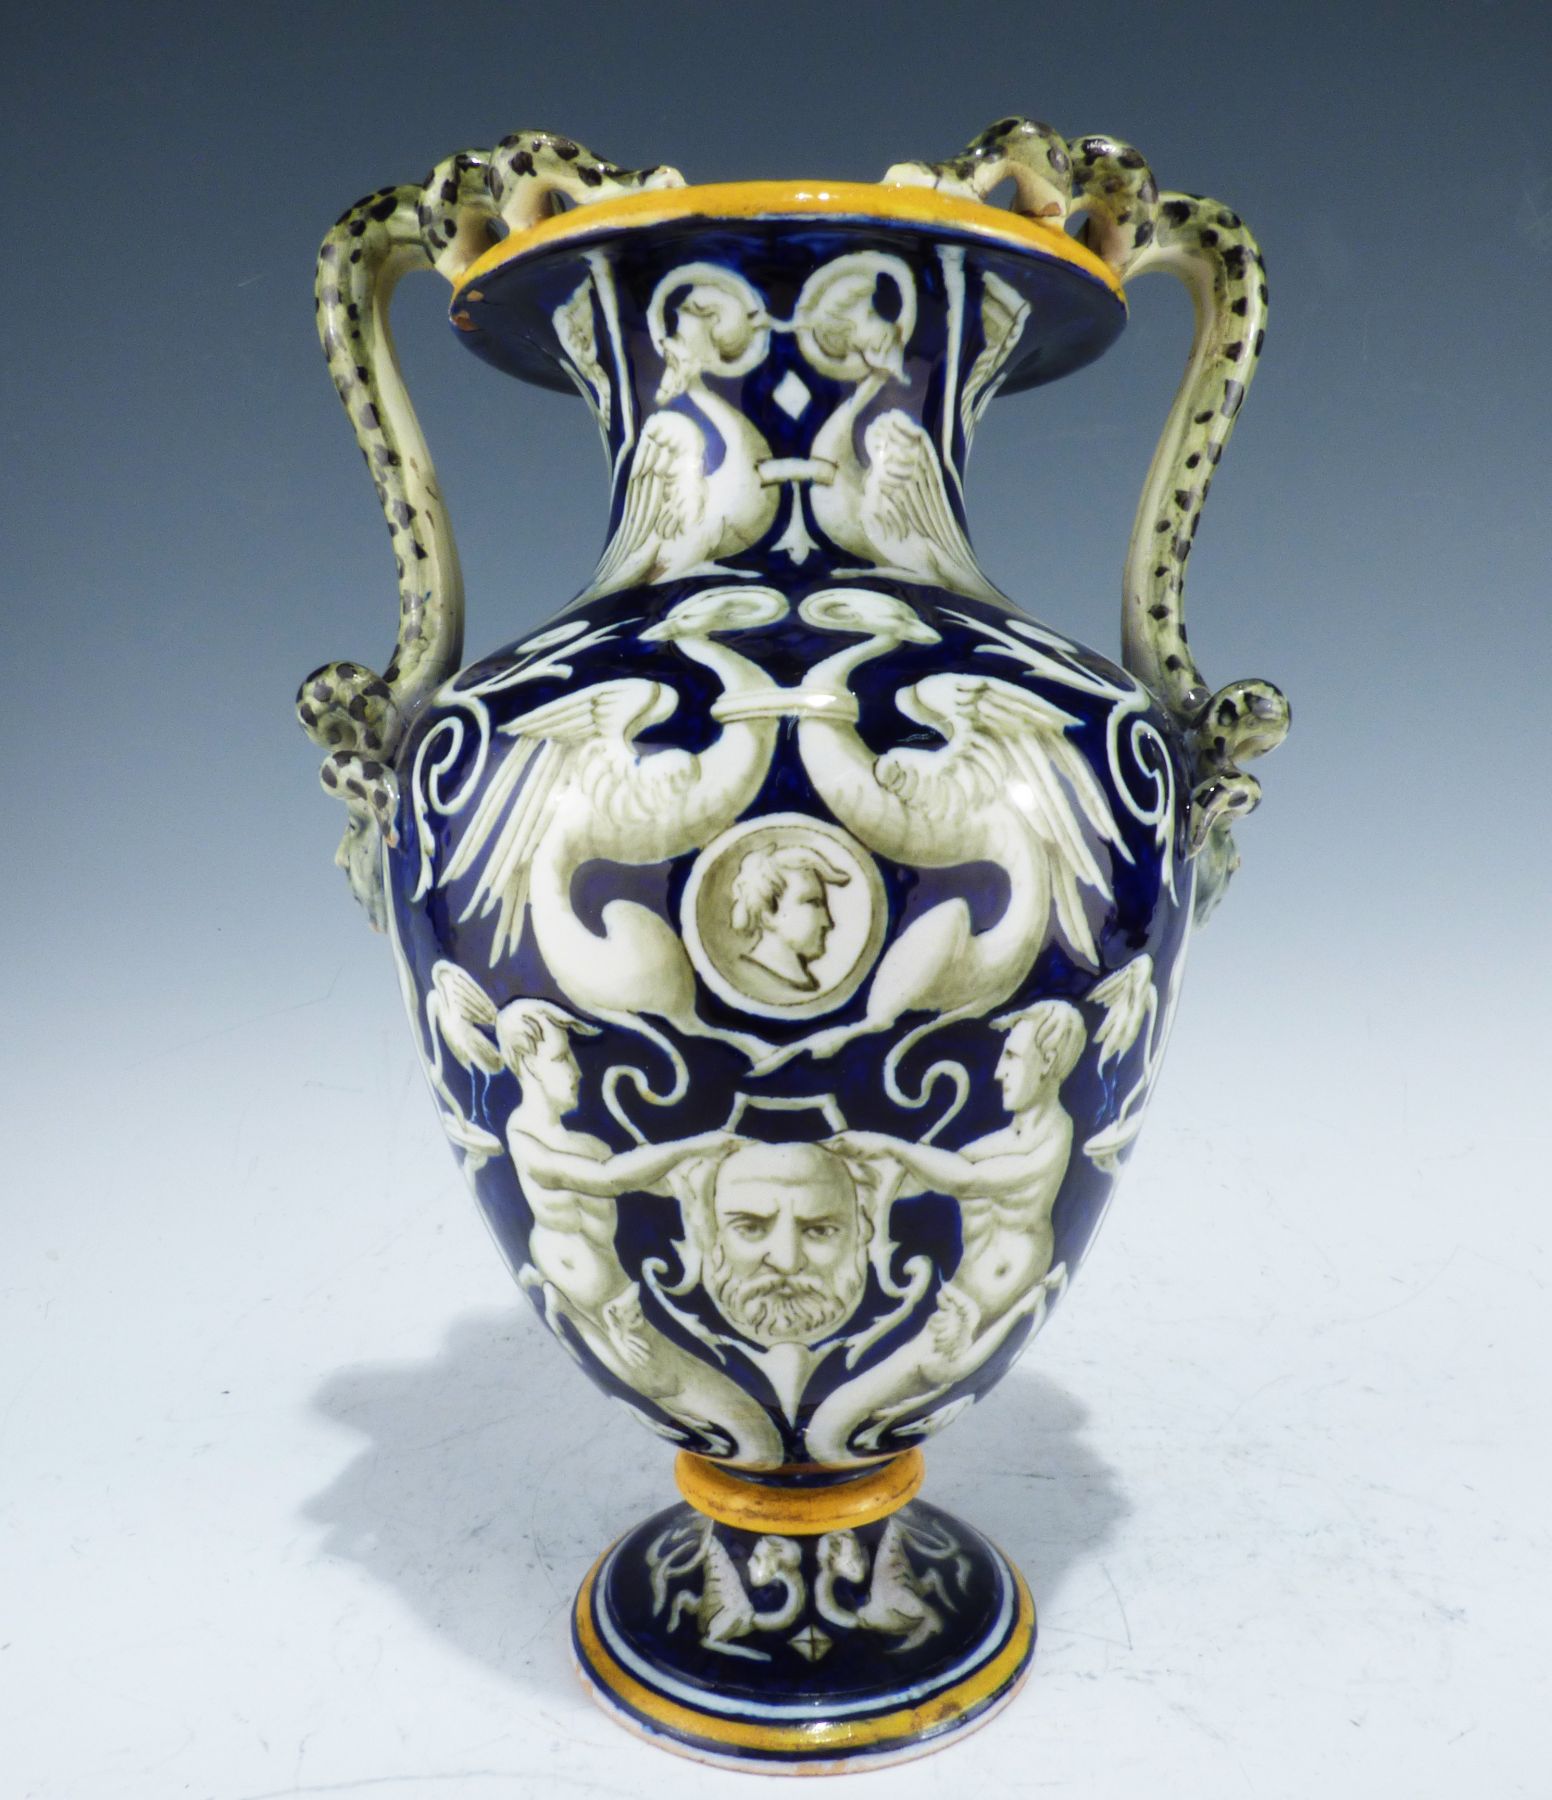 Antique Italian Ginori Faience Pottery Handled Urn with Classical Nude Figures and Figural Snake Handles